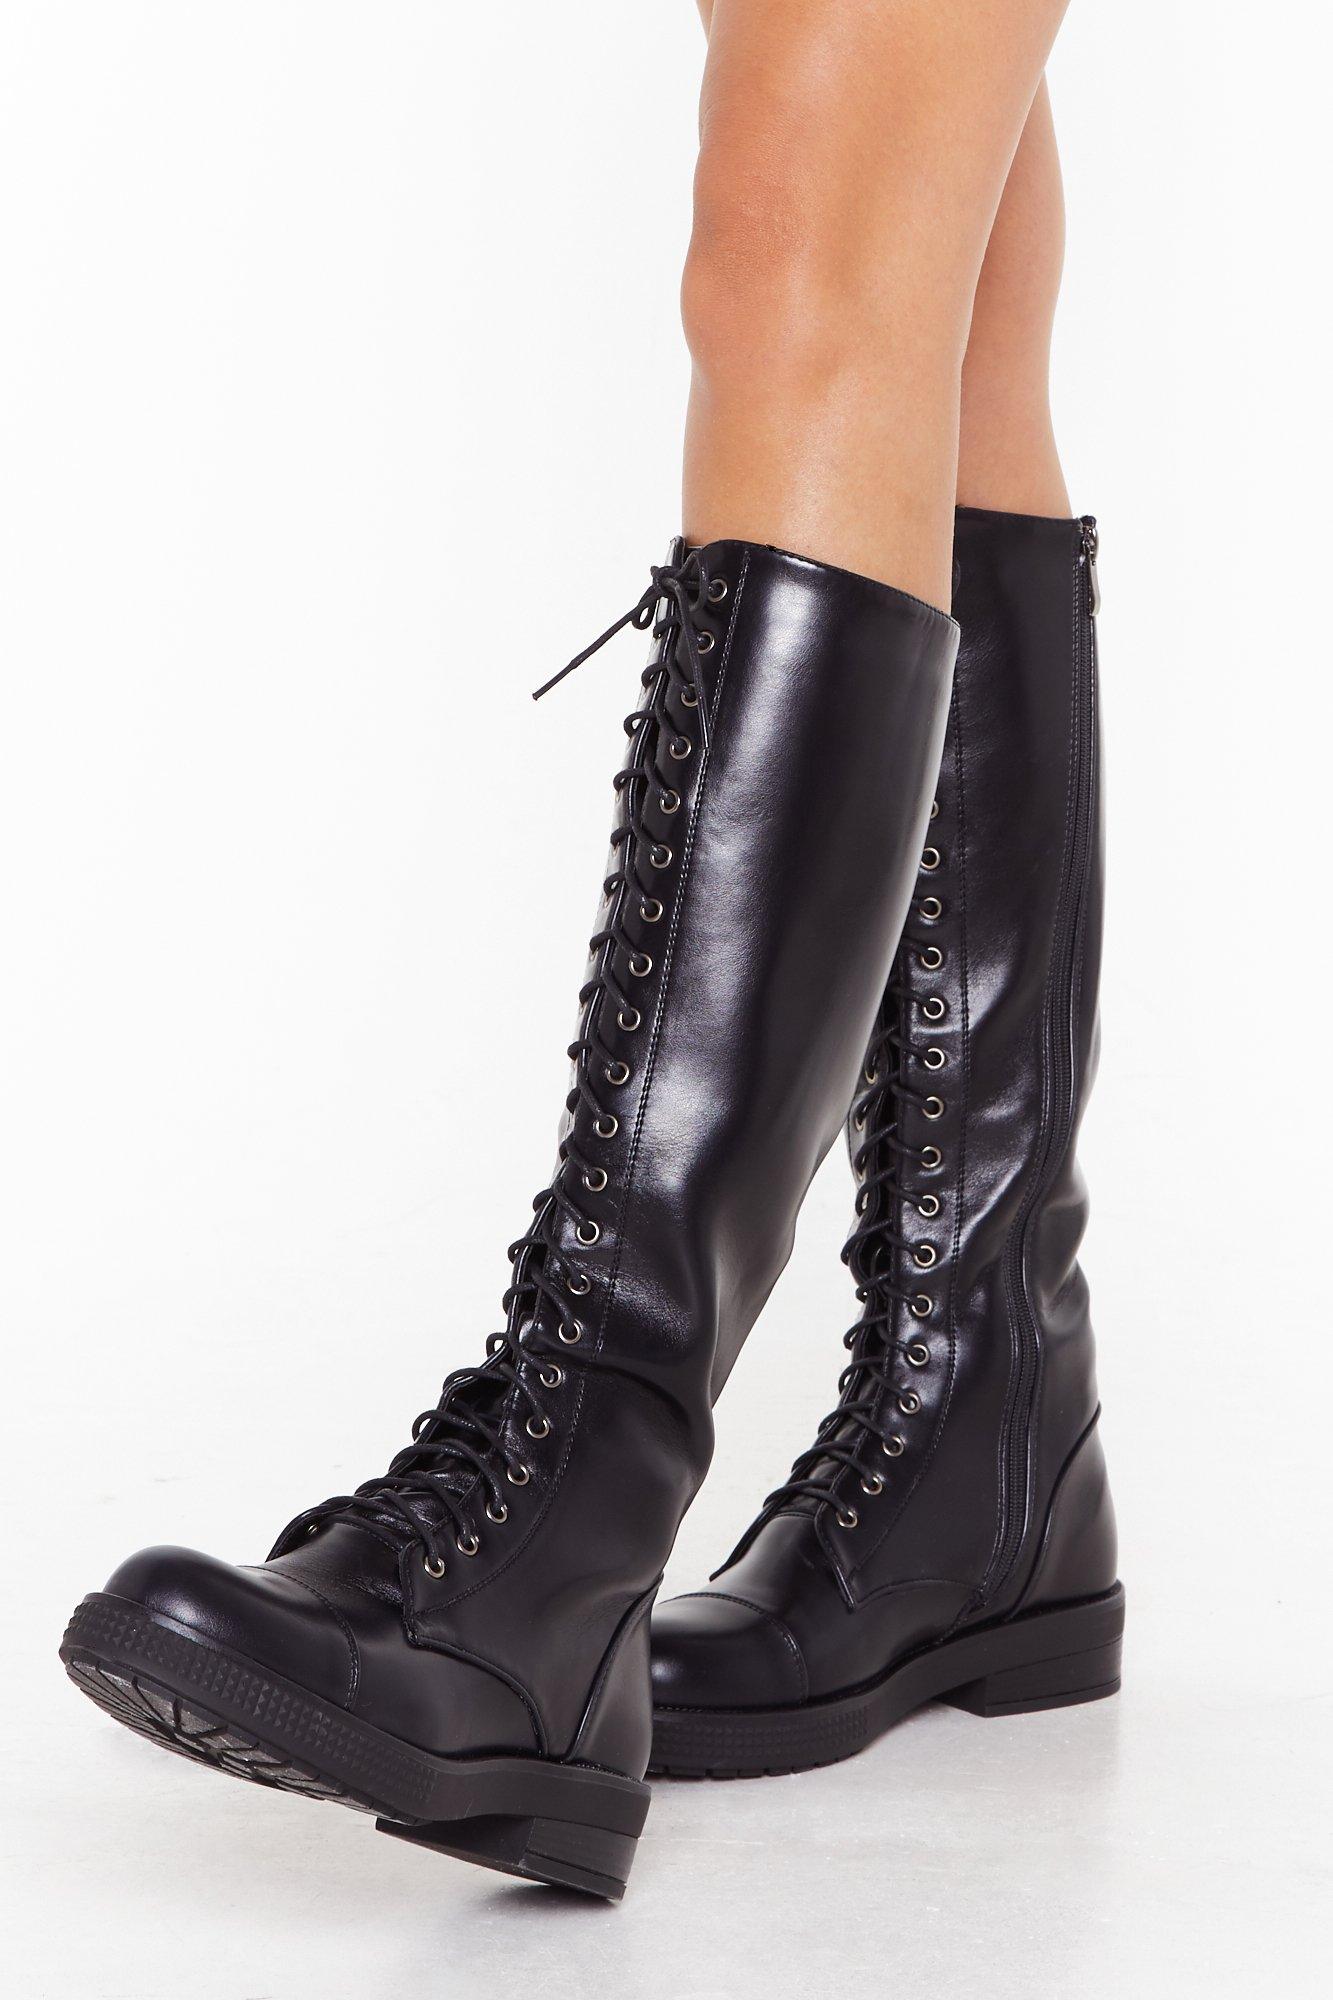 Hold Lace-Up Faux Leather Knee-High 